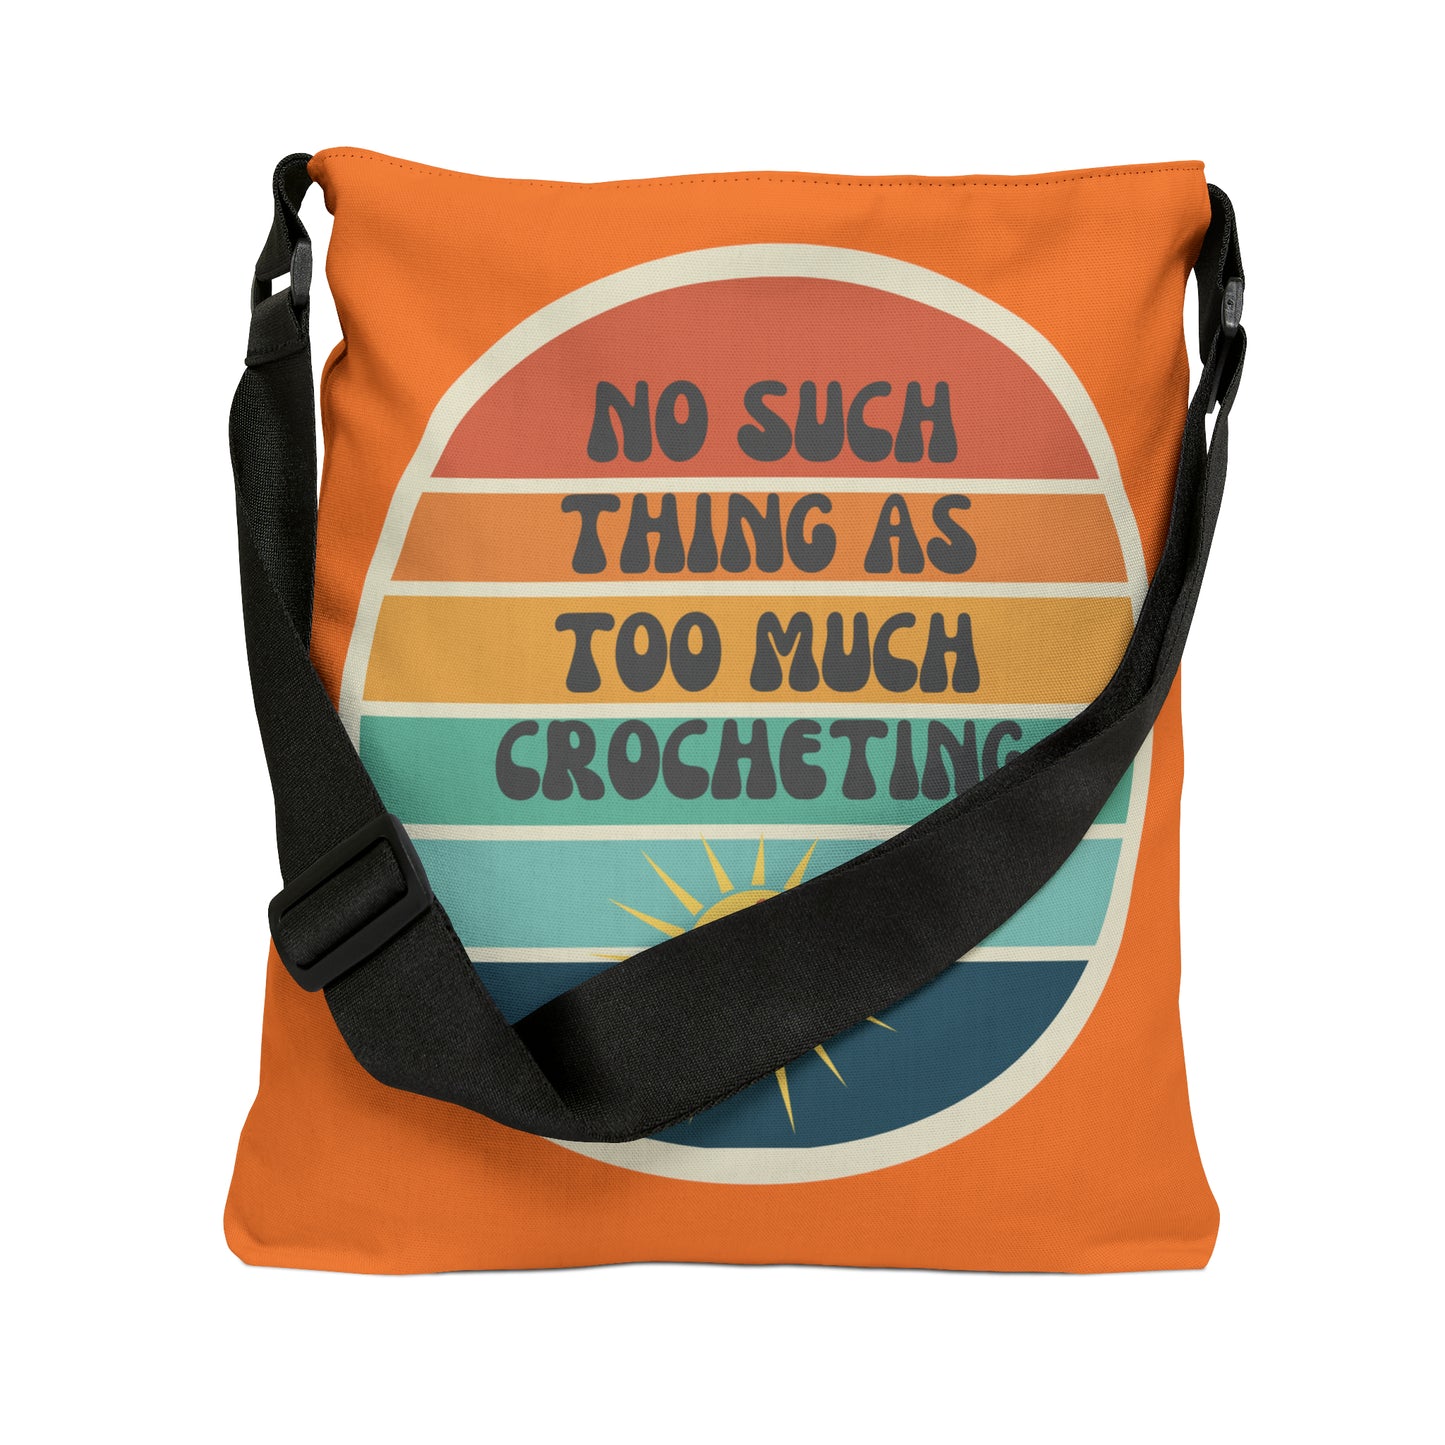 No Such Thing as Too Much Crocheting - Adjustable Tote Bag (AOP)